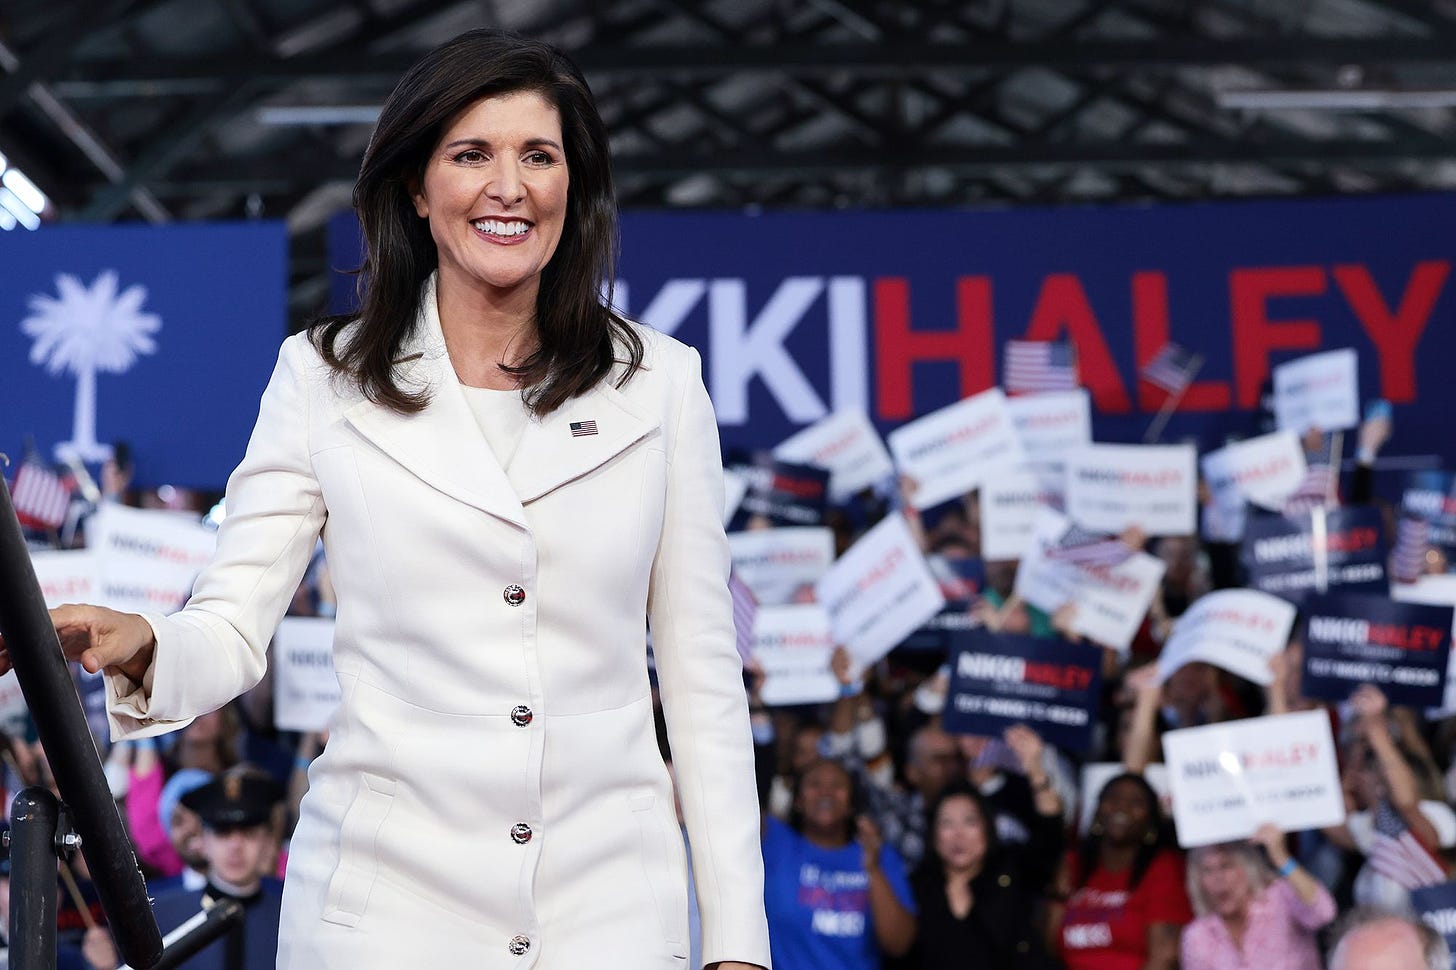 Video: Nikki Haley delivers her first 2024 presidential campaign pitch |  CNN Politics